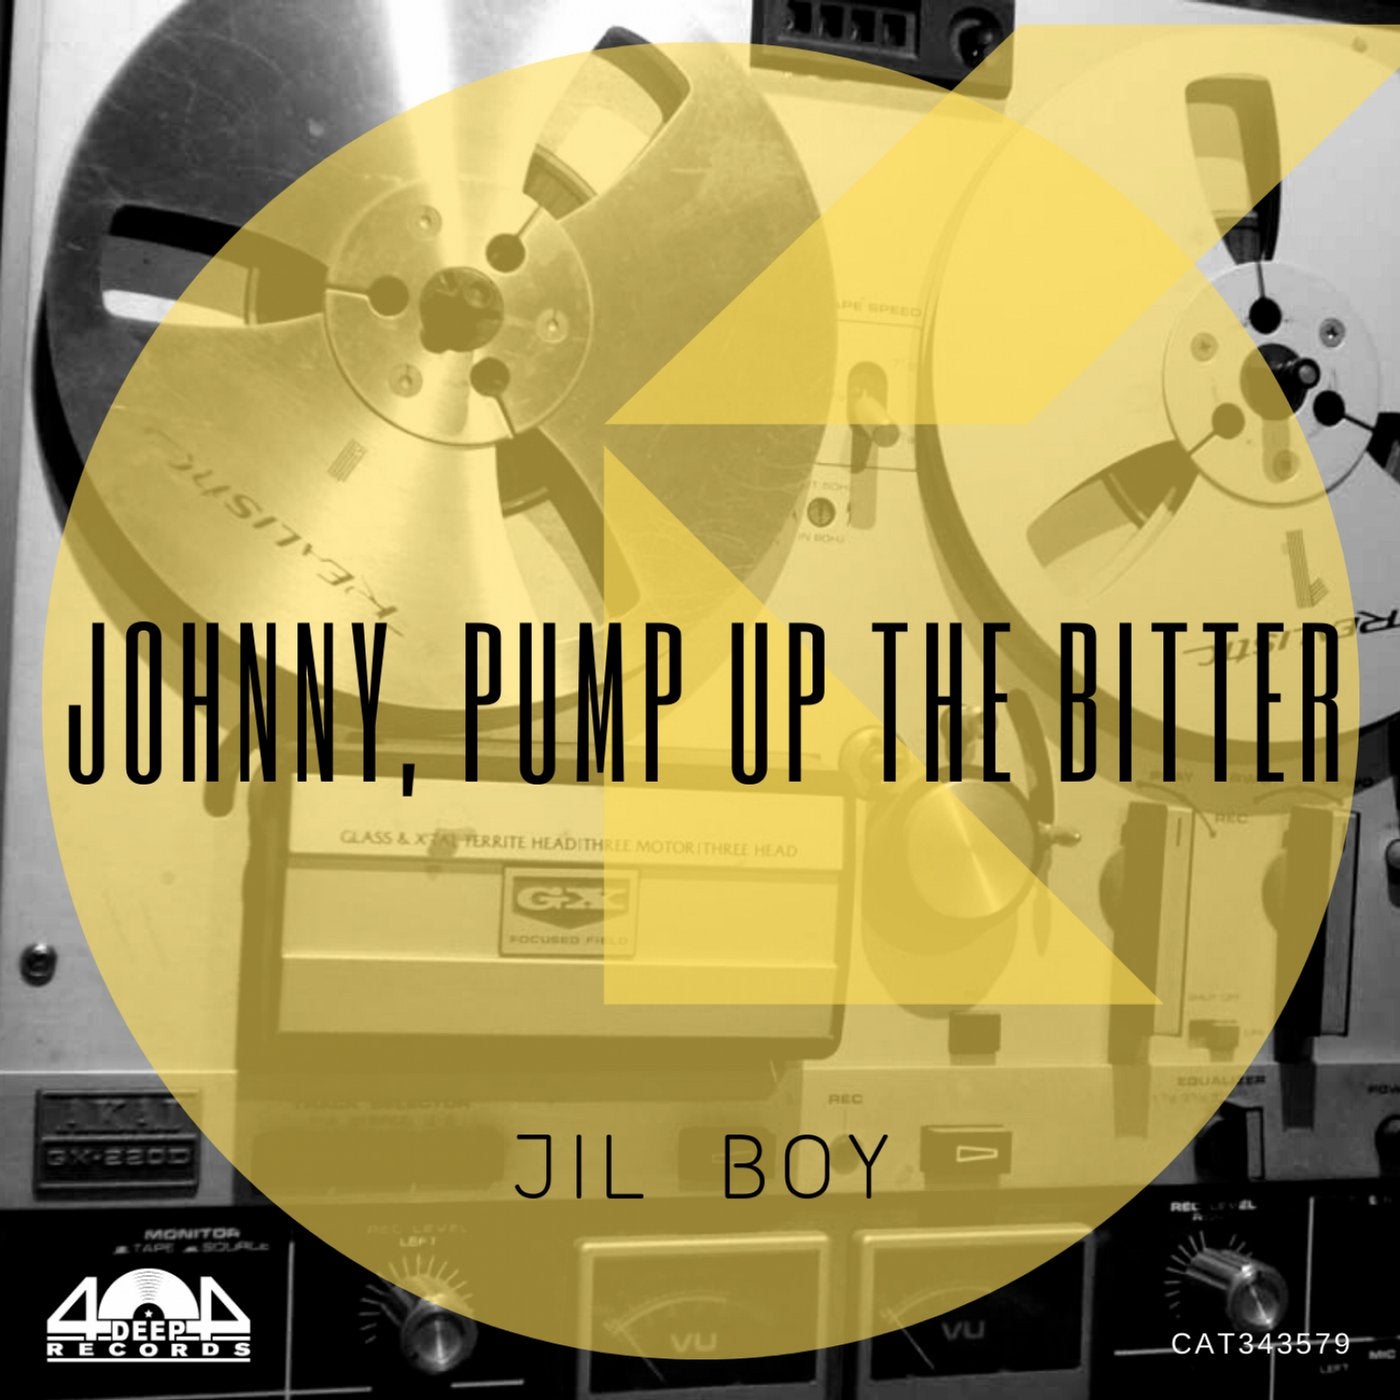 Johnny, Pump Up The Bitter